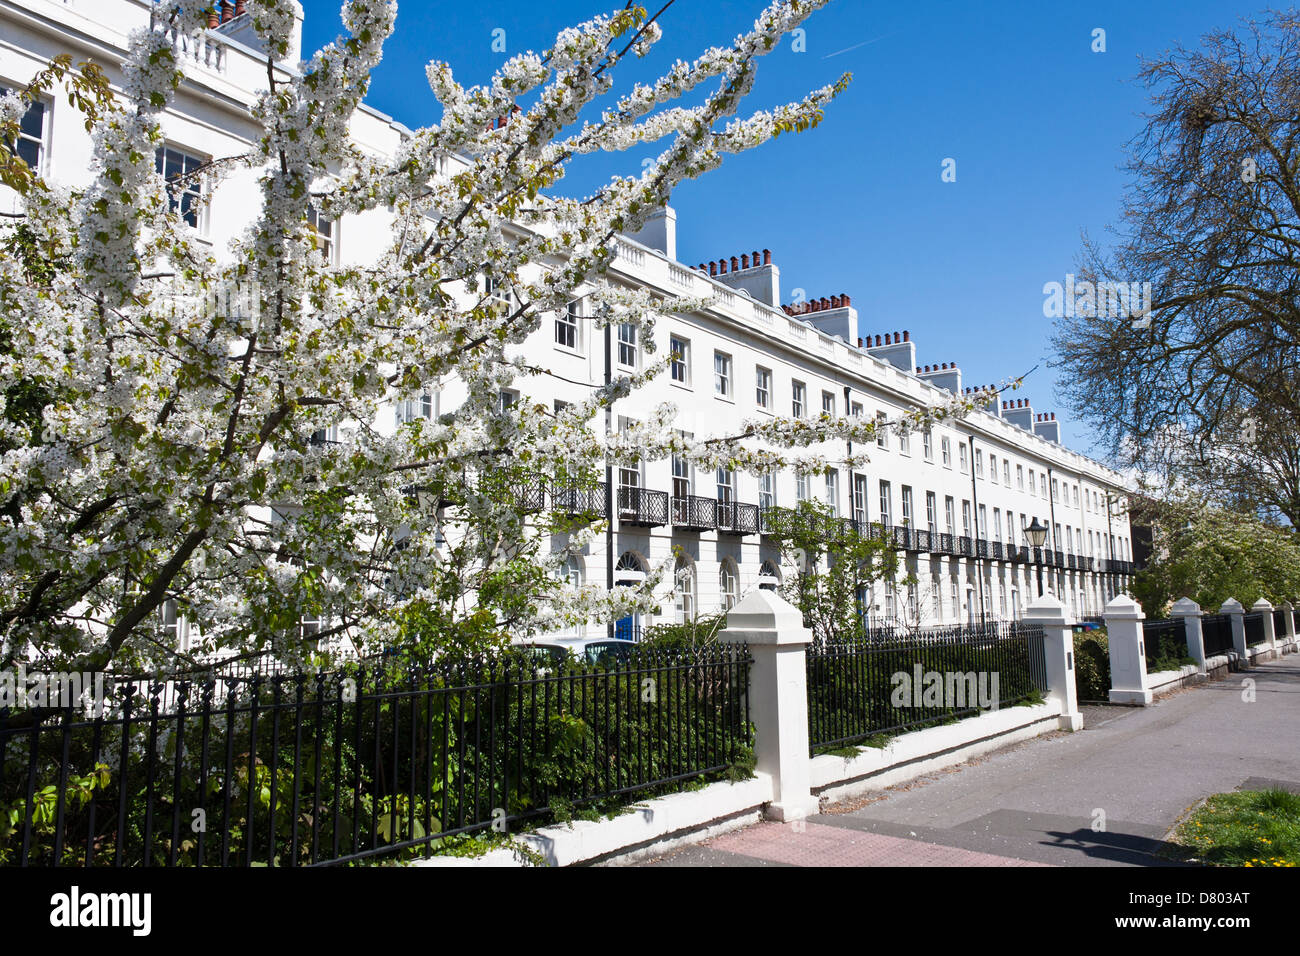 Albion Terrace in Reading, Berkshire, a Grade II listed building. England, GB, UK. Stock Photo